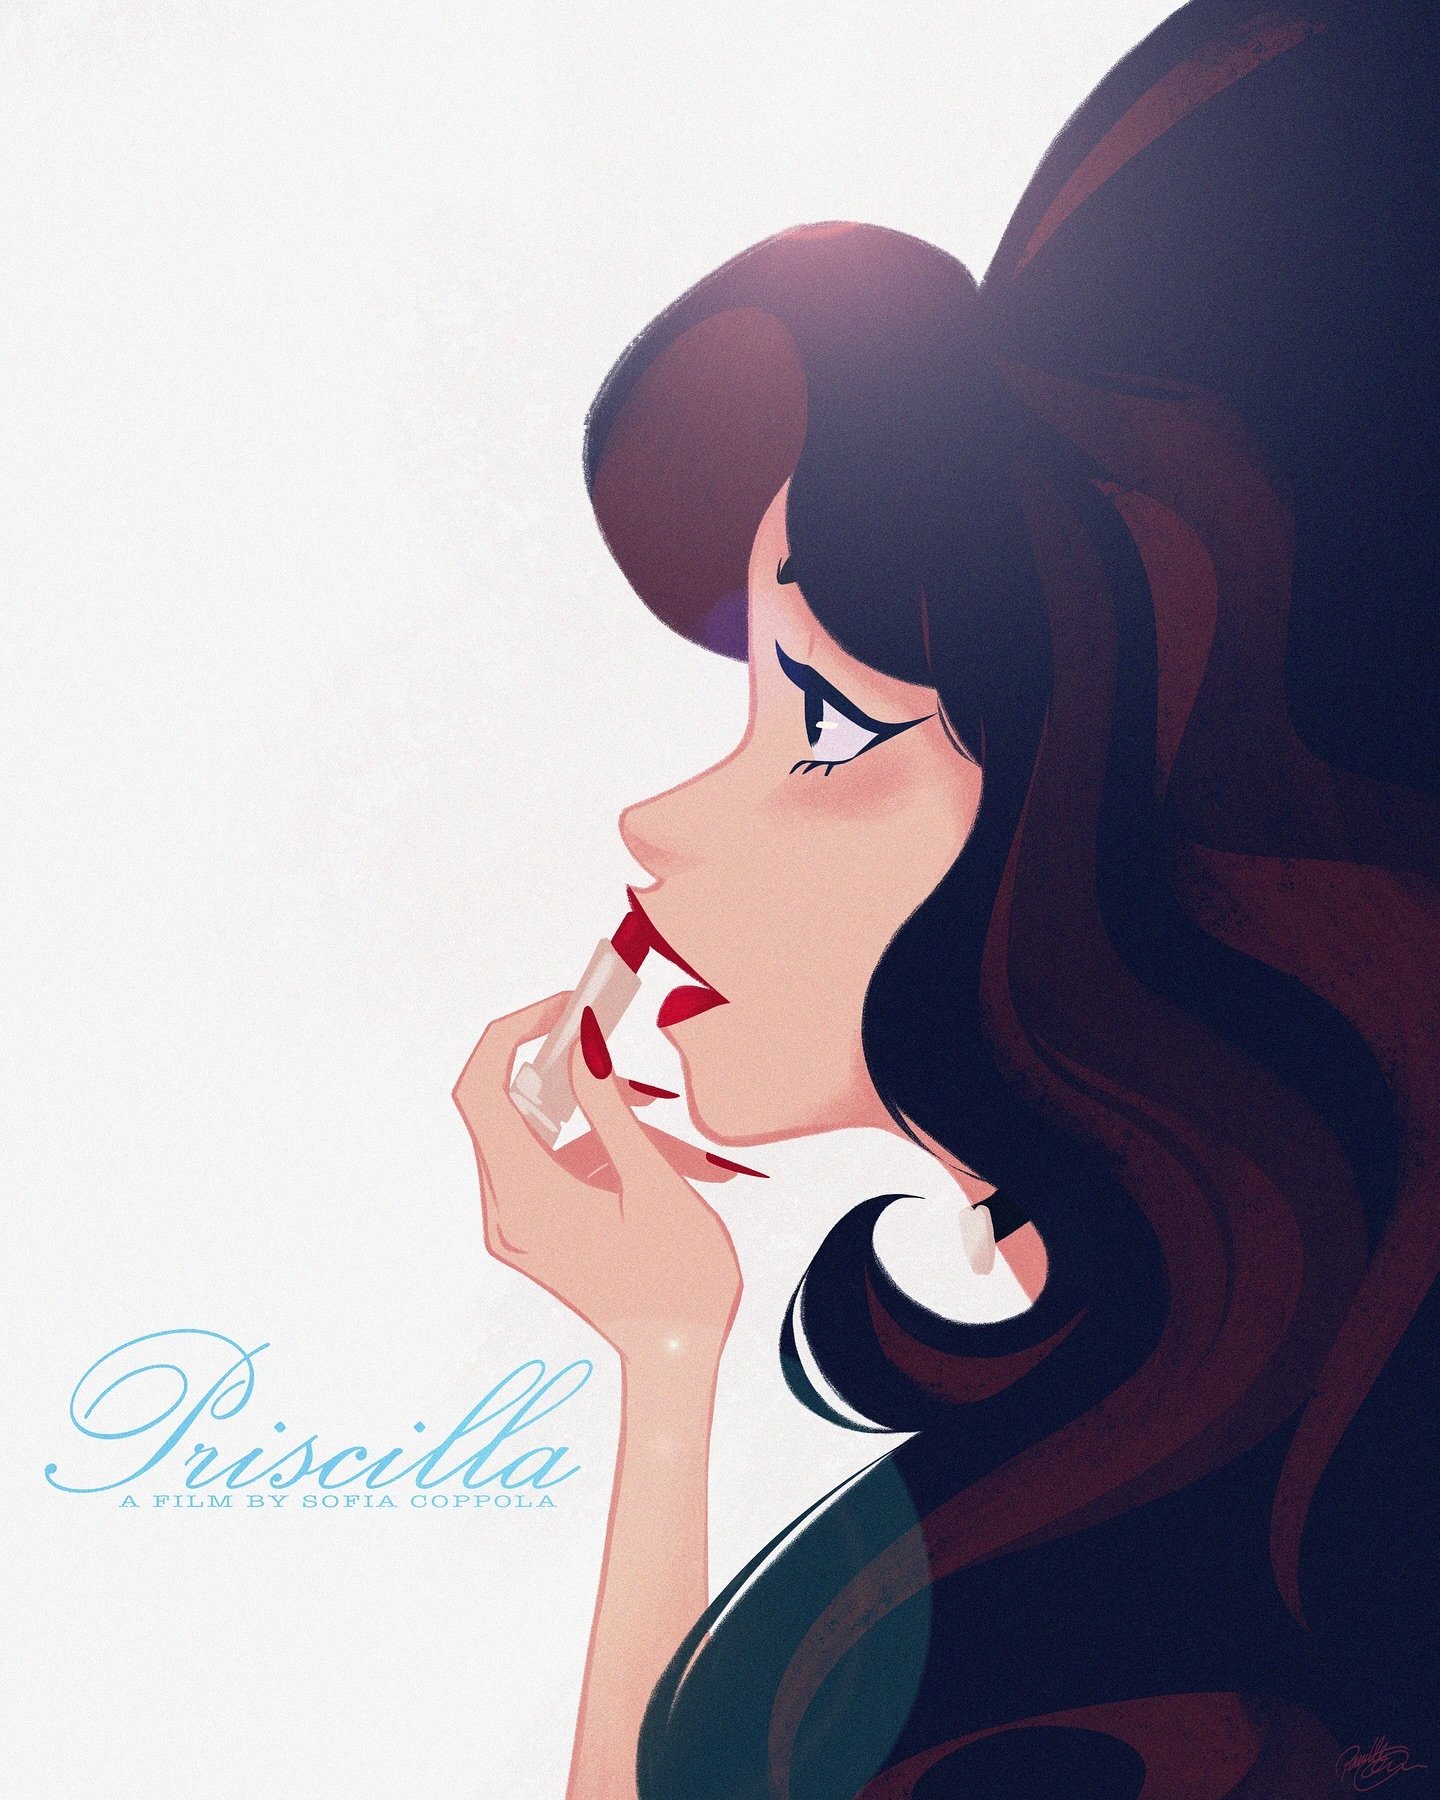 I finally had a chance to see @sofiacoppola&rsquo;s @priscillamovie this week.
It&rsquo;s so beautiful and I love the esthetic 💕 Now I just want big hair and red lips 👄 
#girlsinanimation #drawing #priscilla #priscillapresley #fanart #movie #lipsti